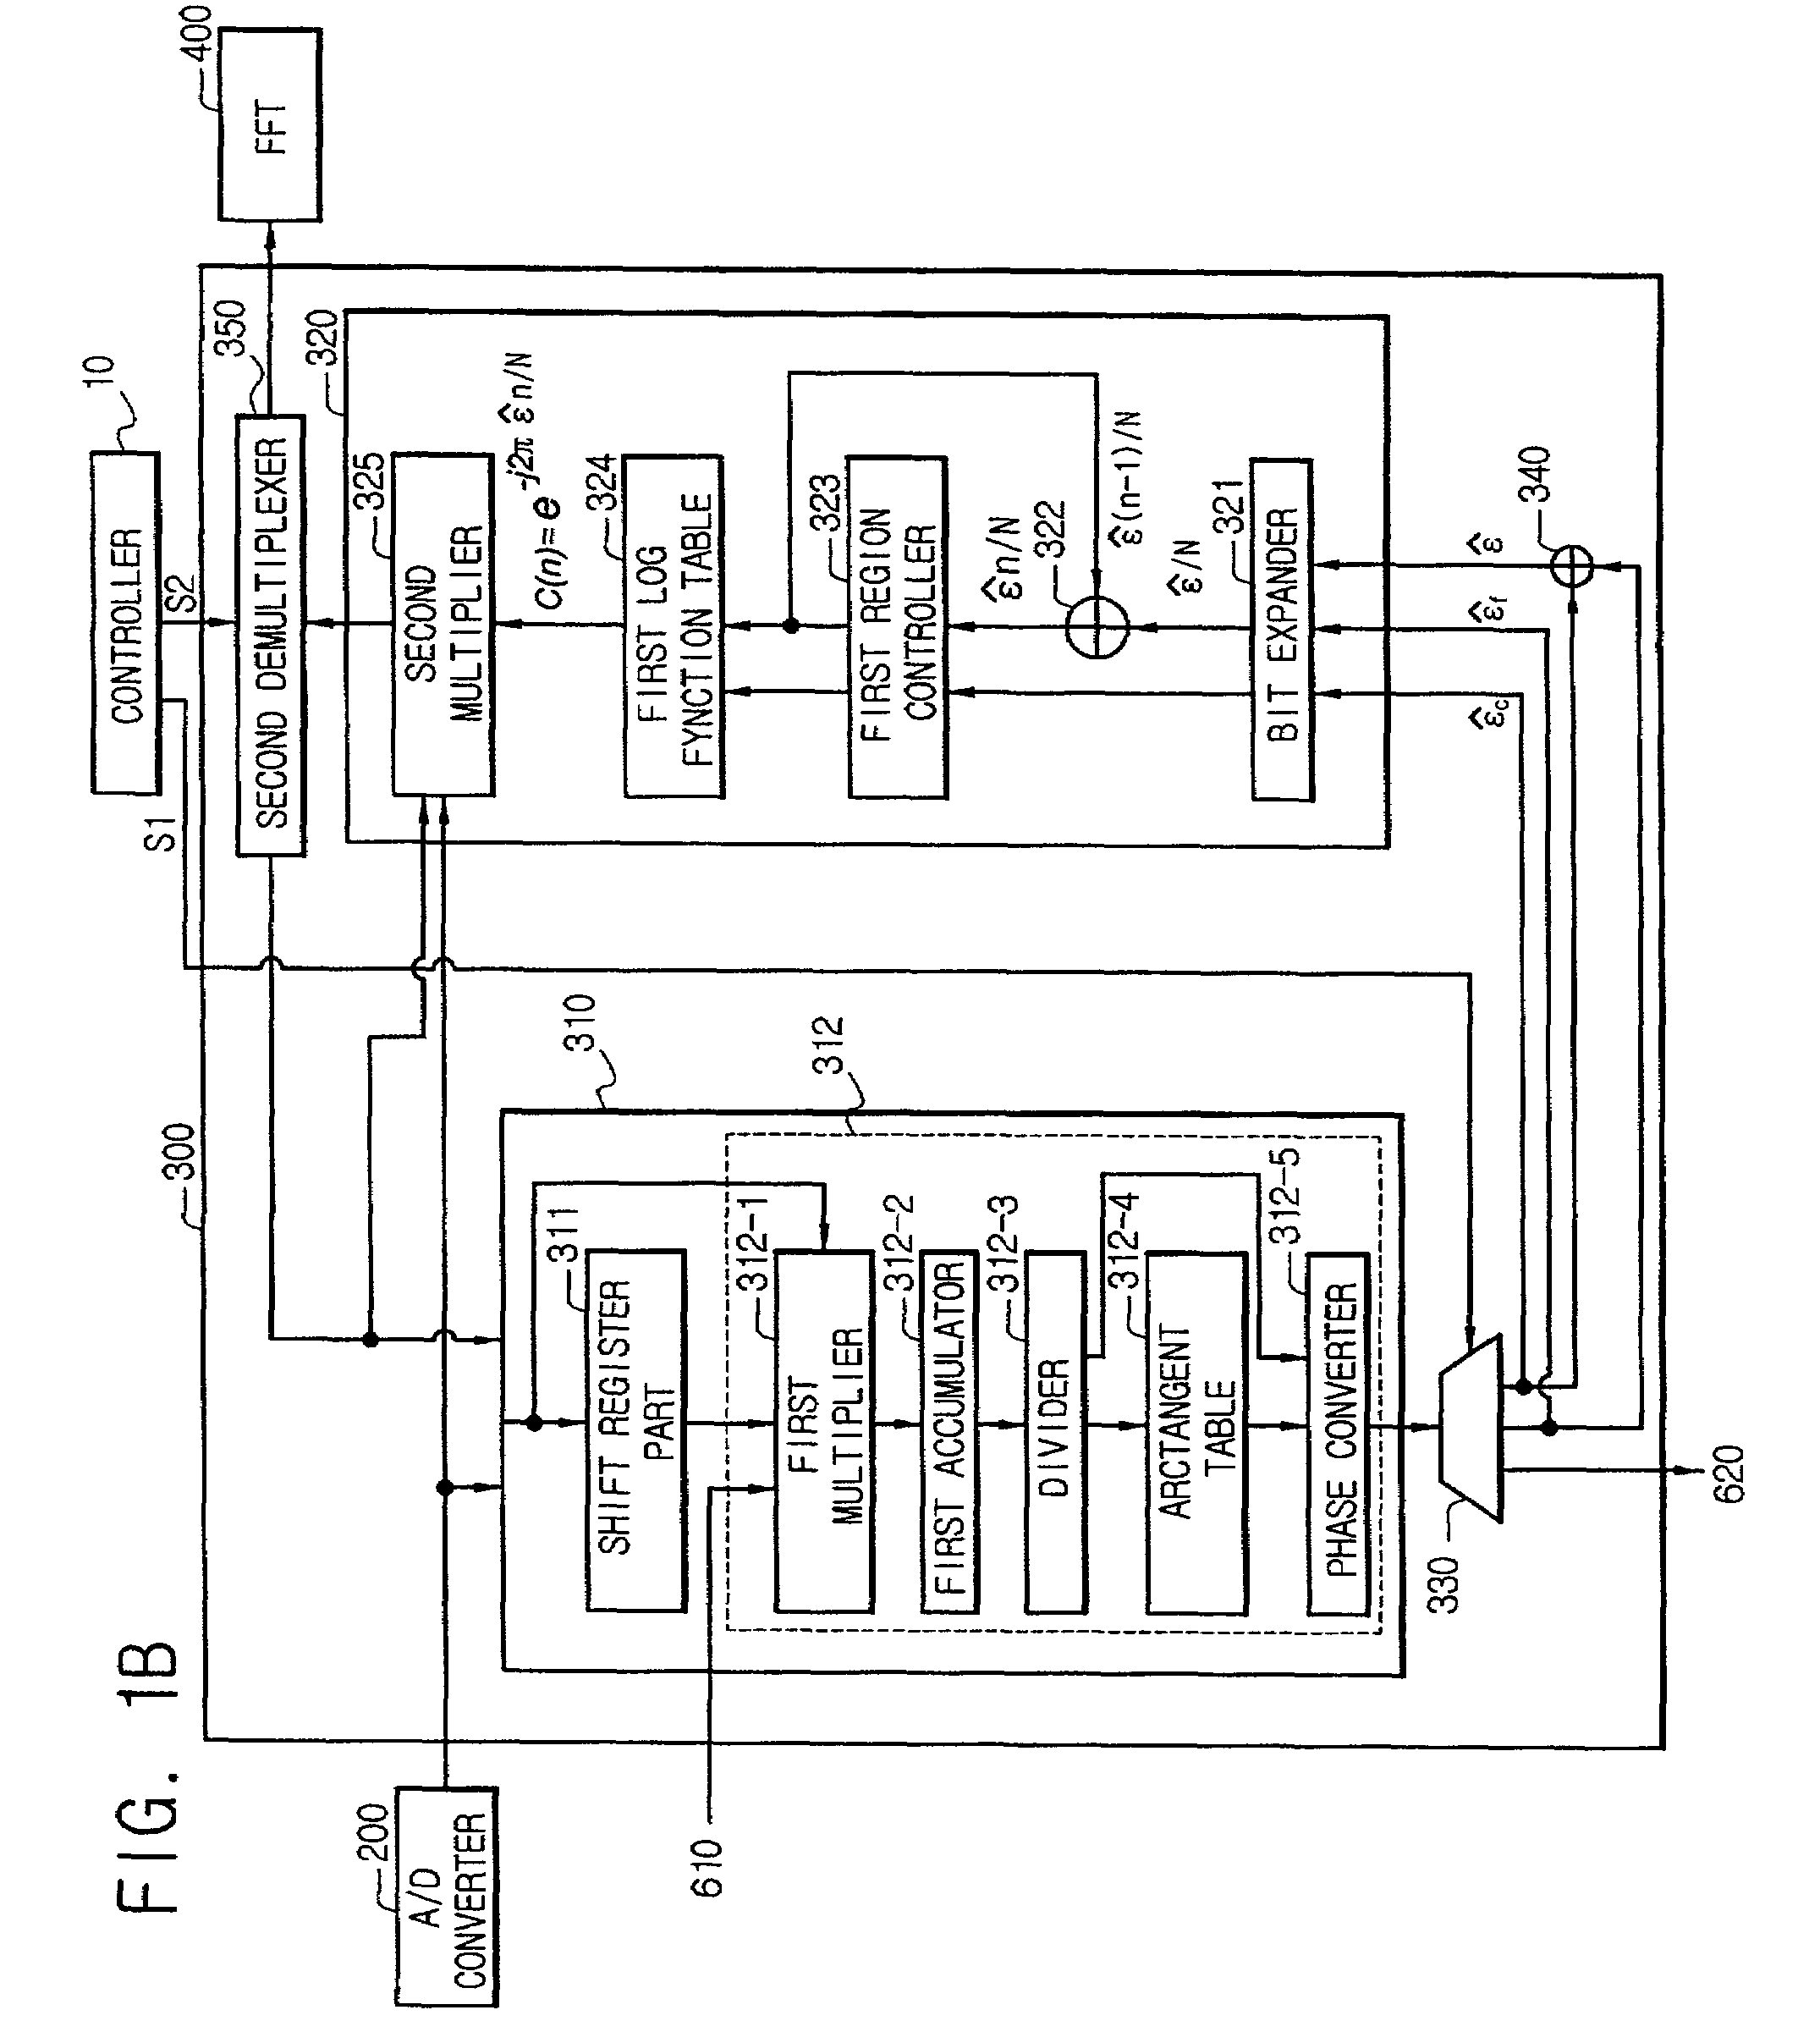 Apparatus and method for synchronizing frequency in orthogonal frequency division multiplexing communication system